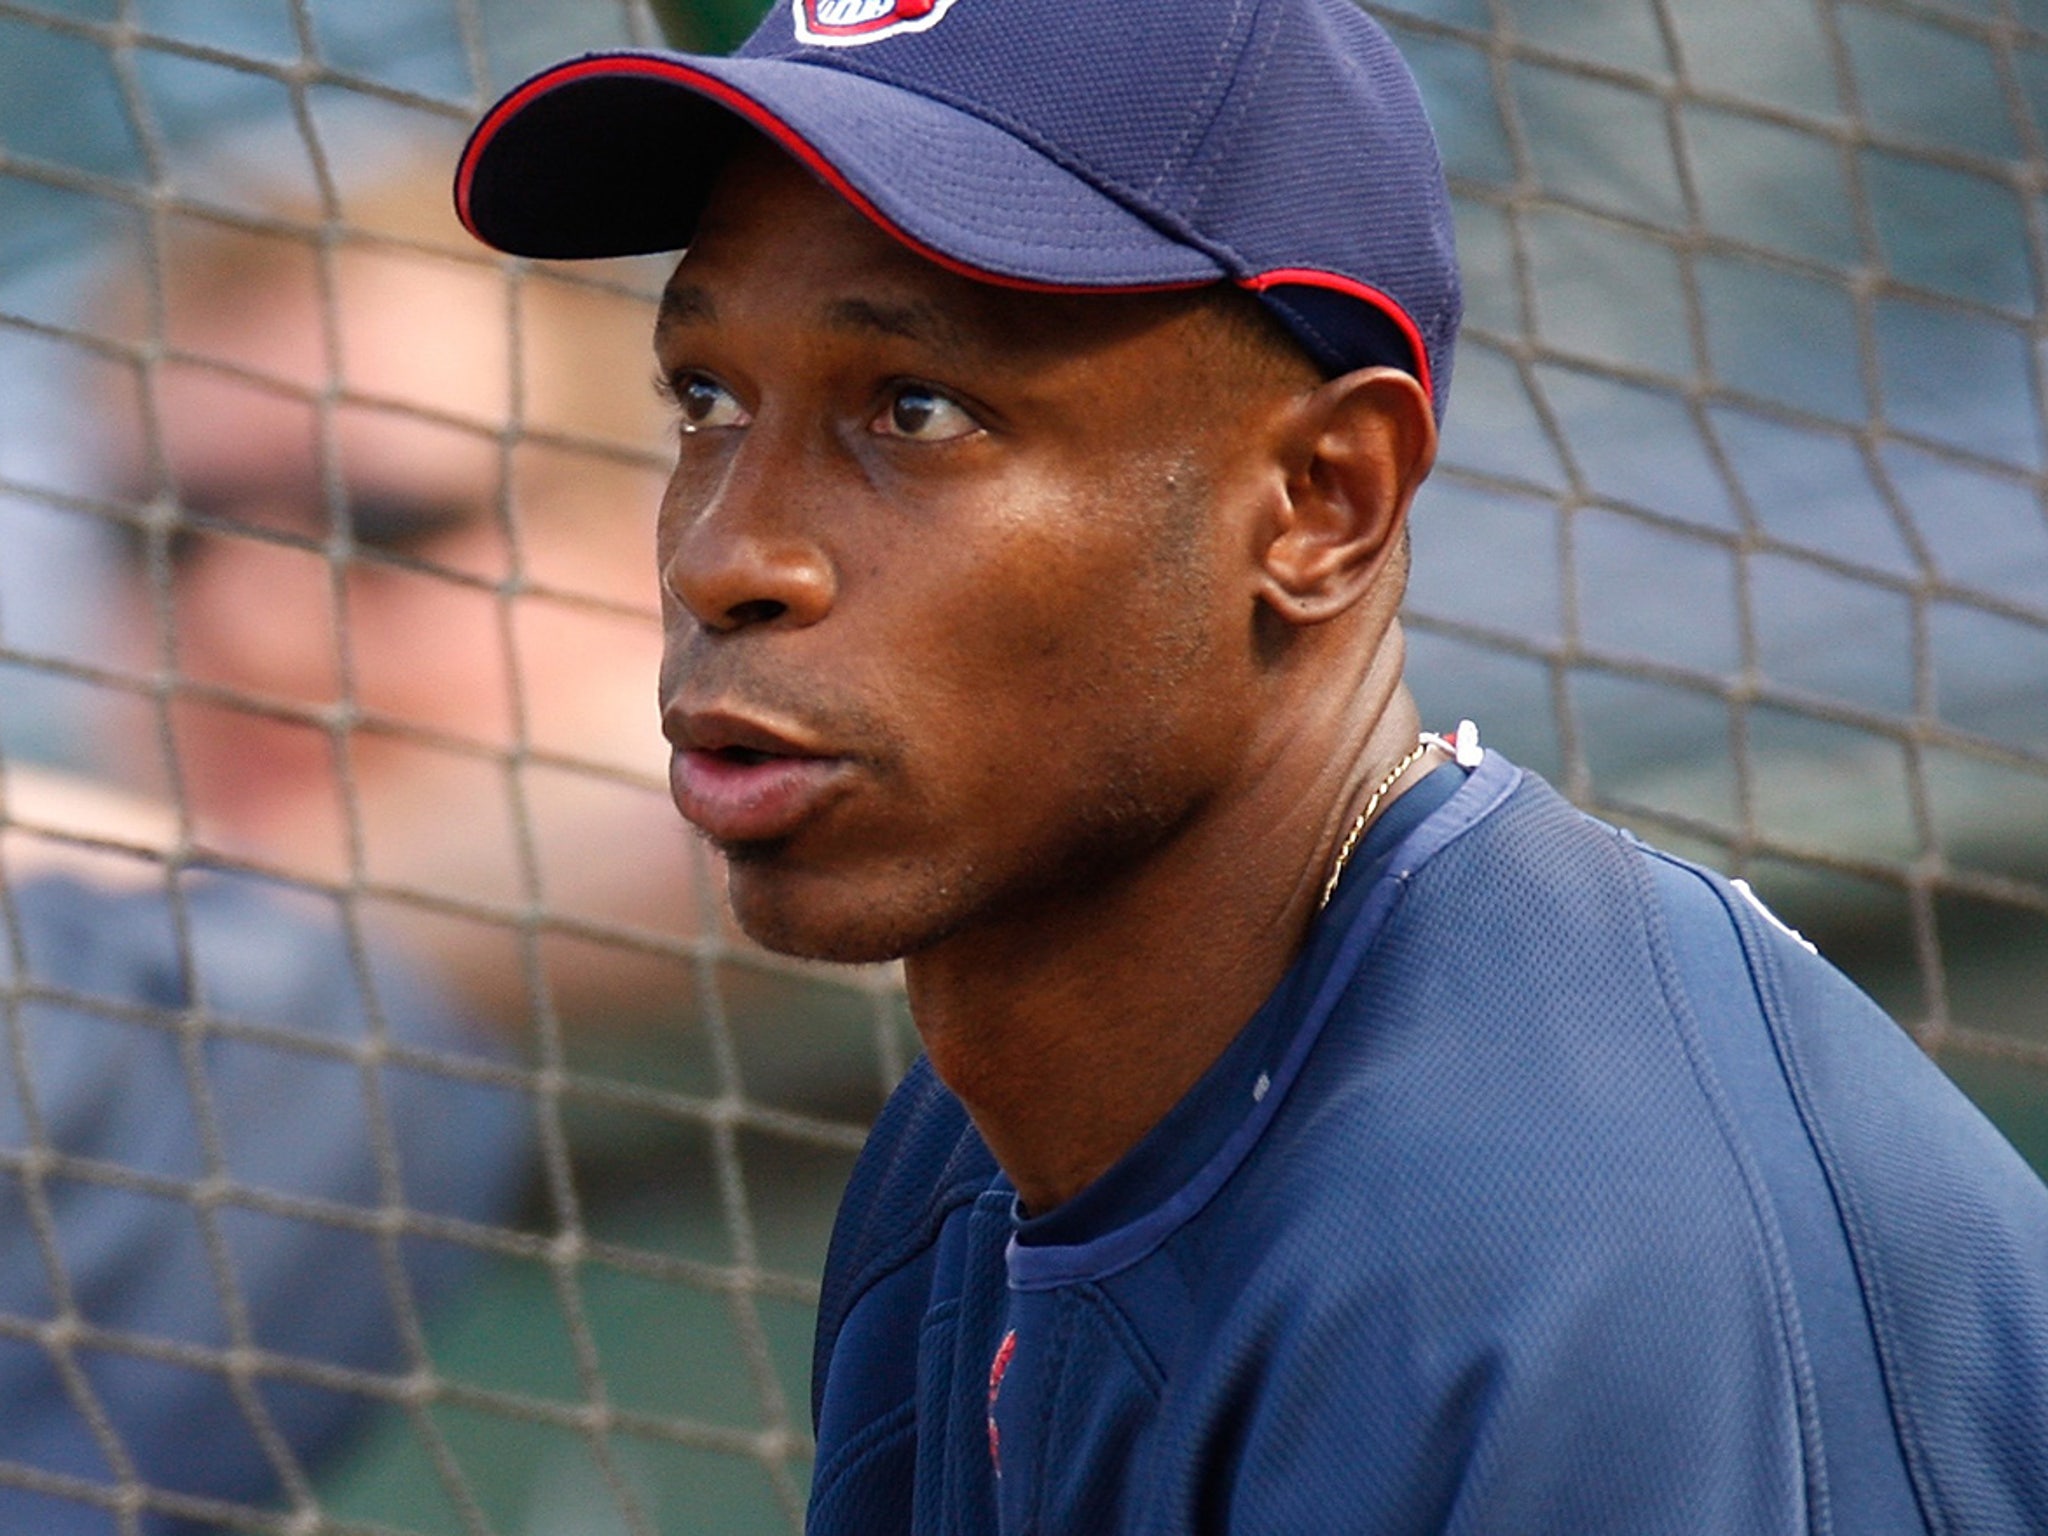 Kenny Lofton: 'I, personally, got affected by other guys cheating